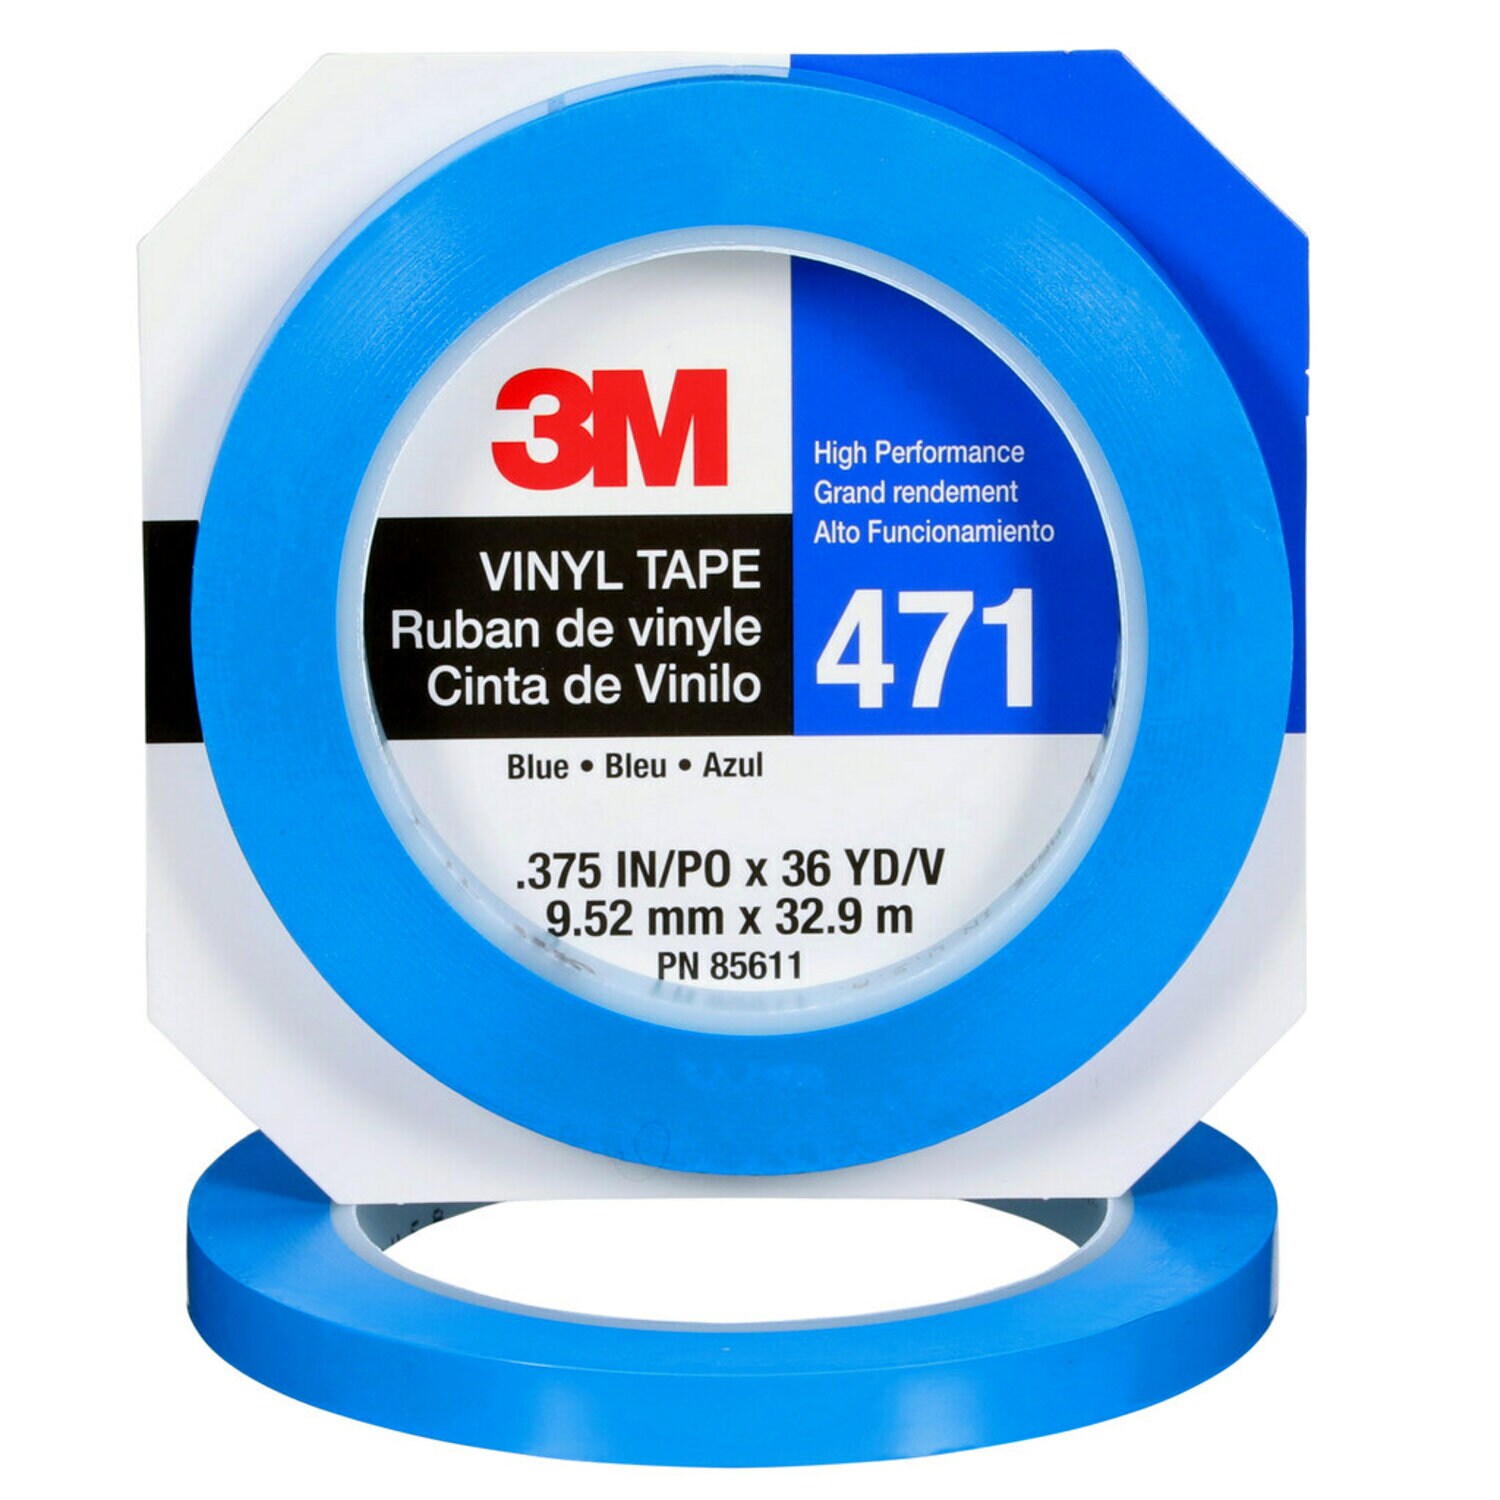 7100049359 - 3M Vinyl Tape 471, Blue, 3/8 in x 36 yd, 5.2 mil, 96 rolls per case,
Individually Wrapped Conveniently Packaged